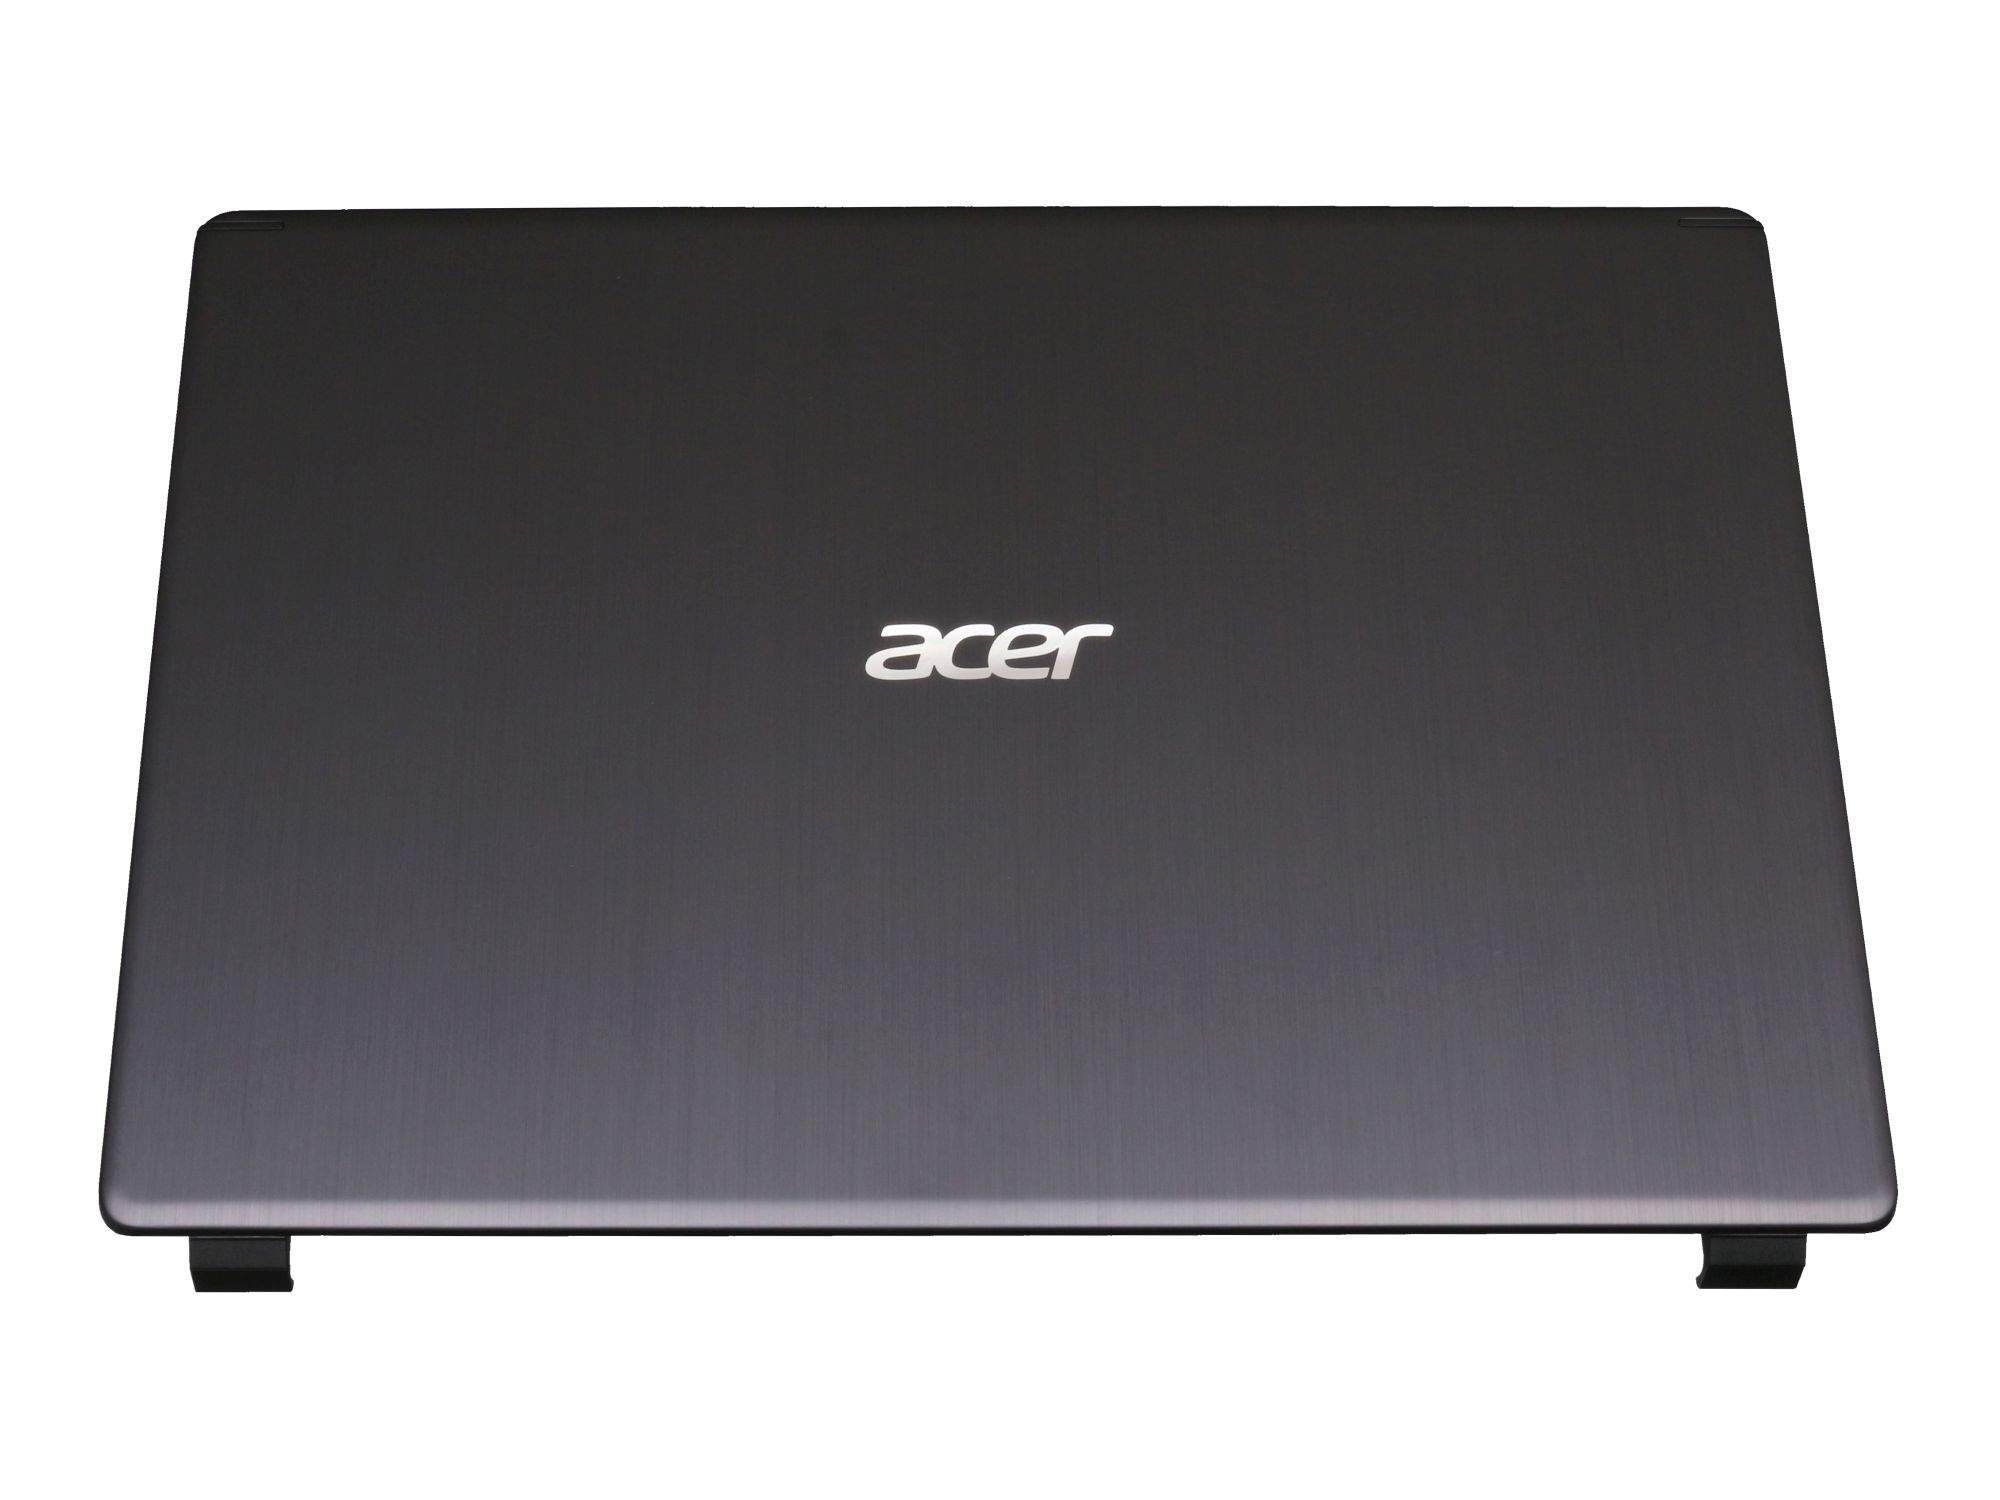 ACER COVER LCD BLACK W/ADHESIVE